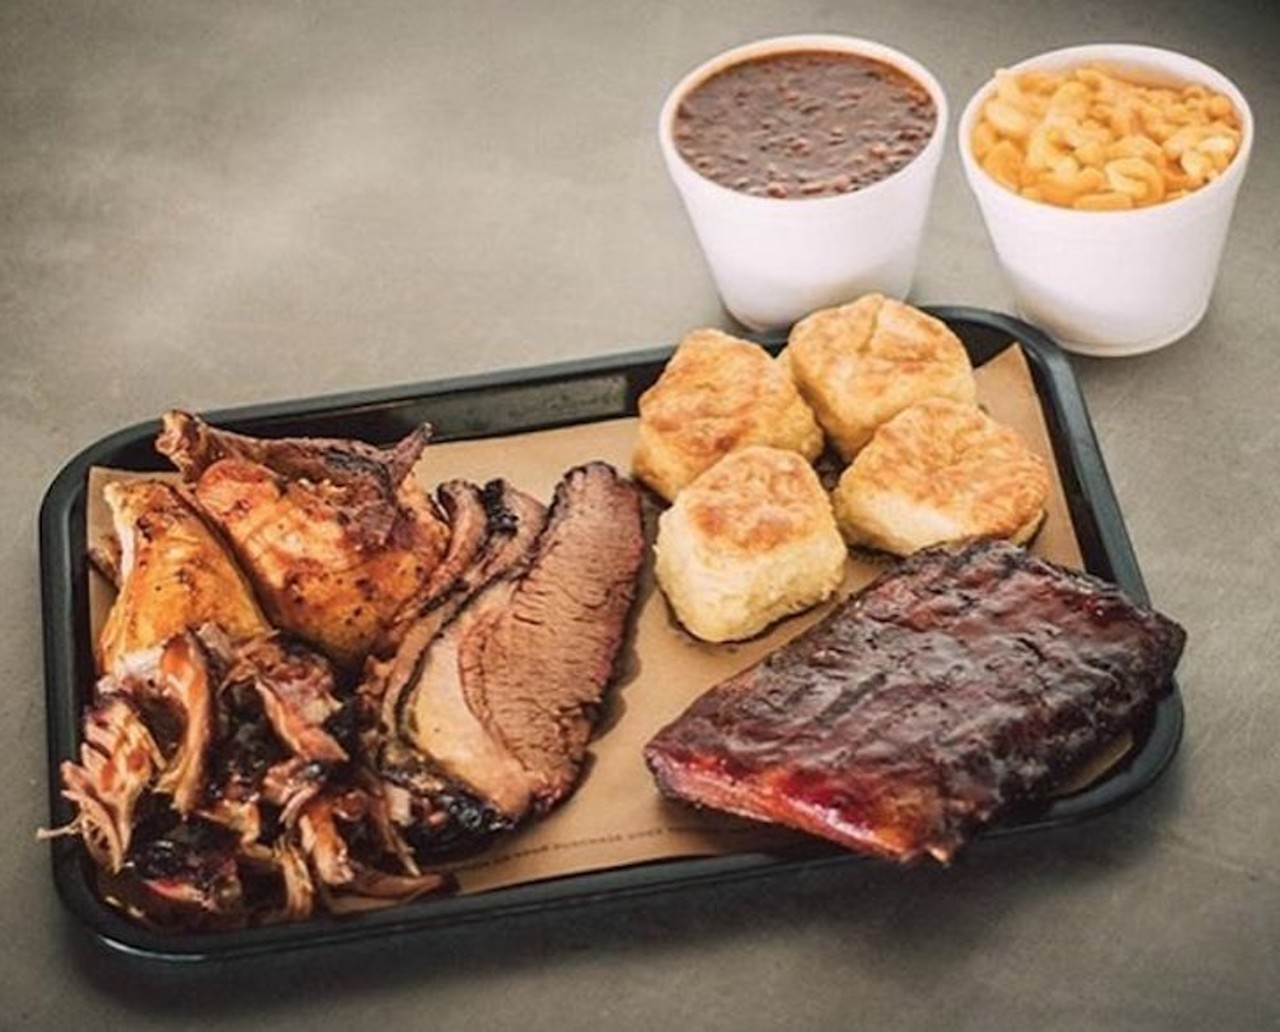 Try this: What they call the Happy Herd: chicken, ribs, pulled pork and brisket with two sides and biscuits. It&#146;s family-style, unless you believe in yourself hard enough. 
Photo via 4riverssmokehouse/ Instagram